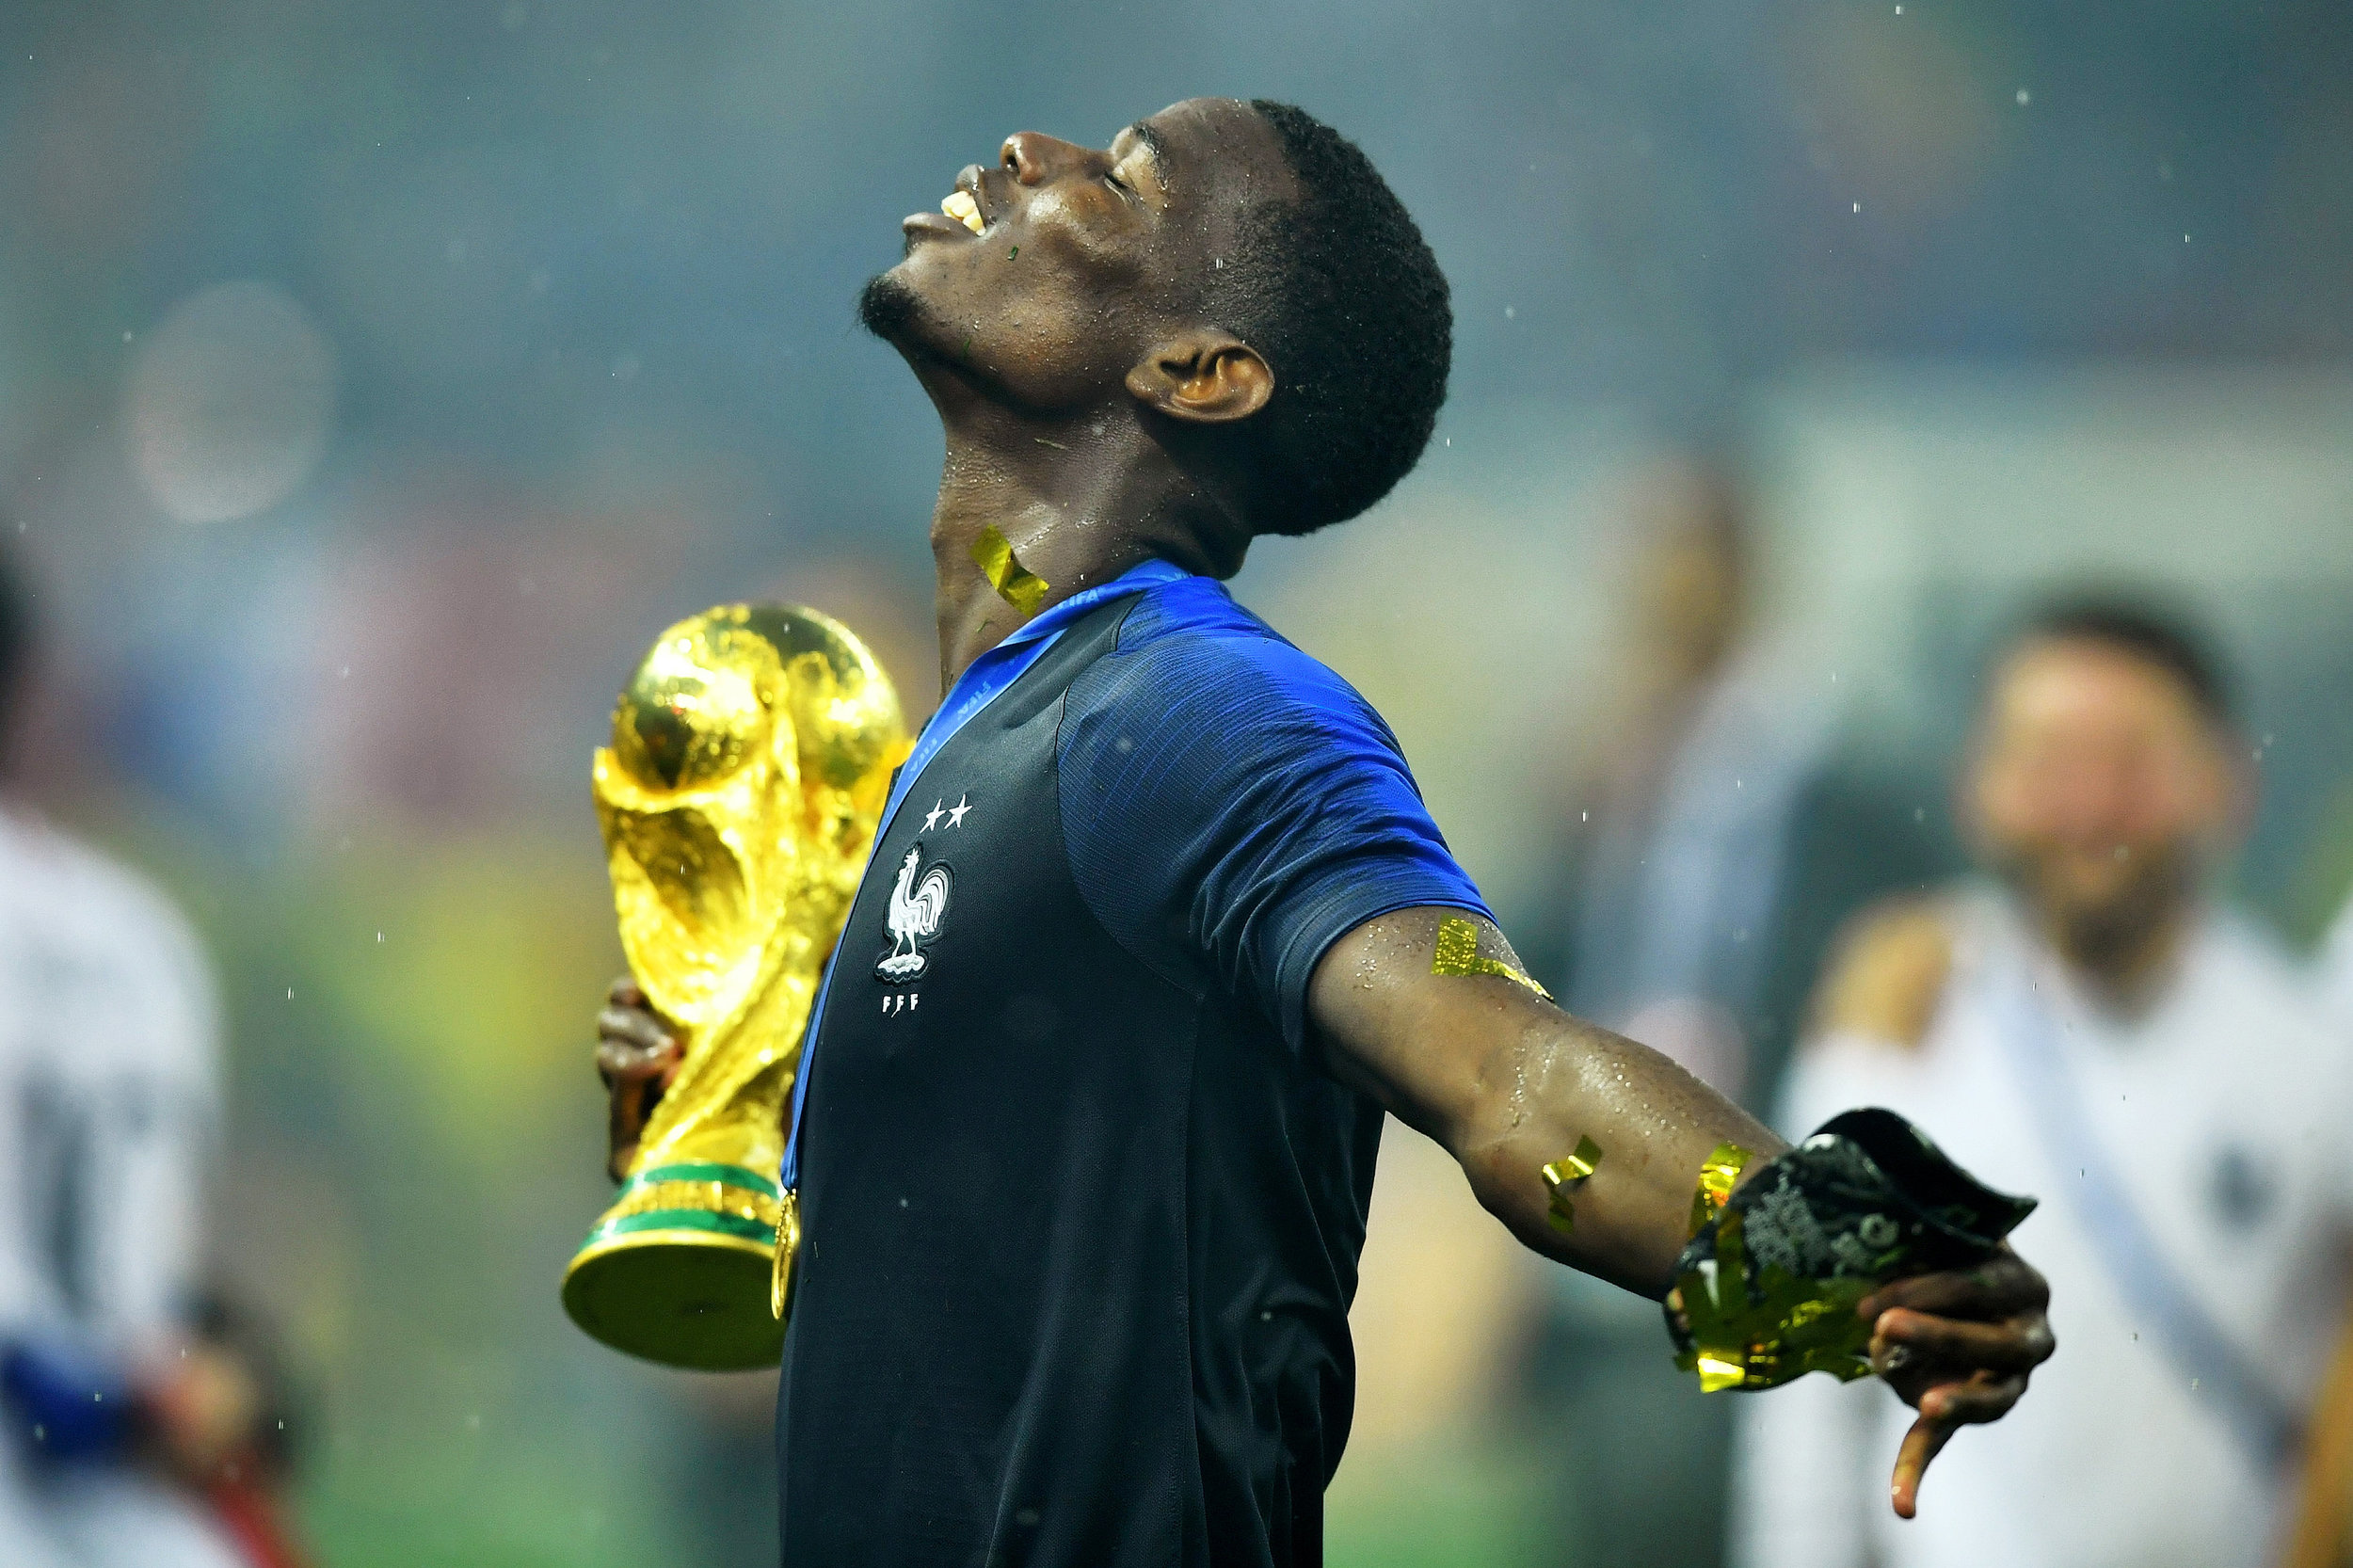  France's Paul Pogba holds the trophy as he celebrates winning the World Cup against Croatia at the Luzhniki Stadium, Moscow.
Photo by Dylan Martinez, 15 July 2018
 